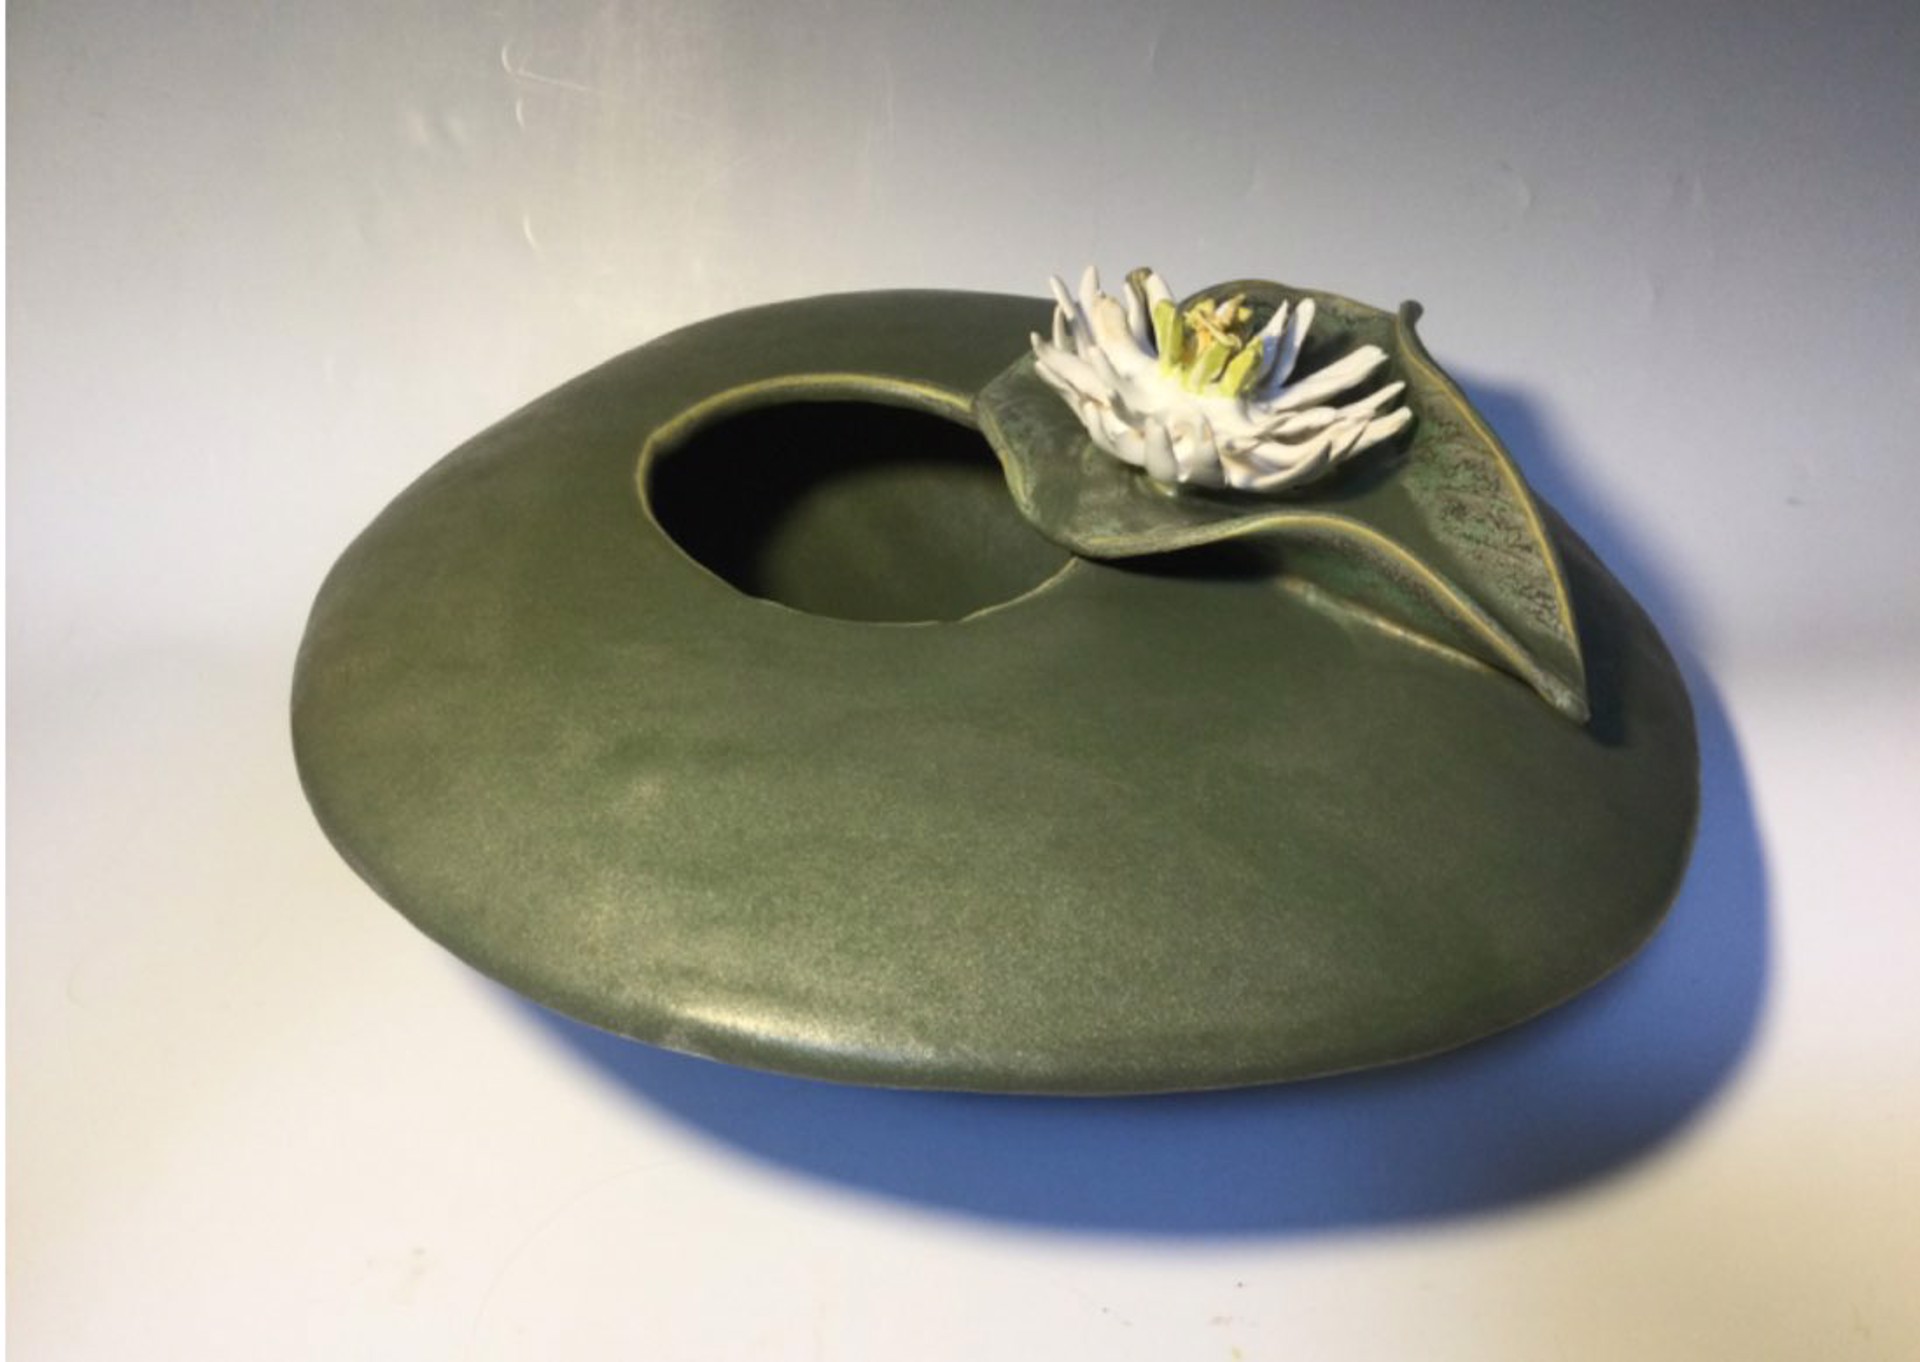 Lily Pad Vessel by Anna M. Elrod